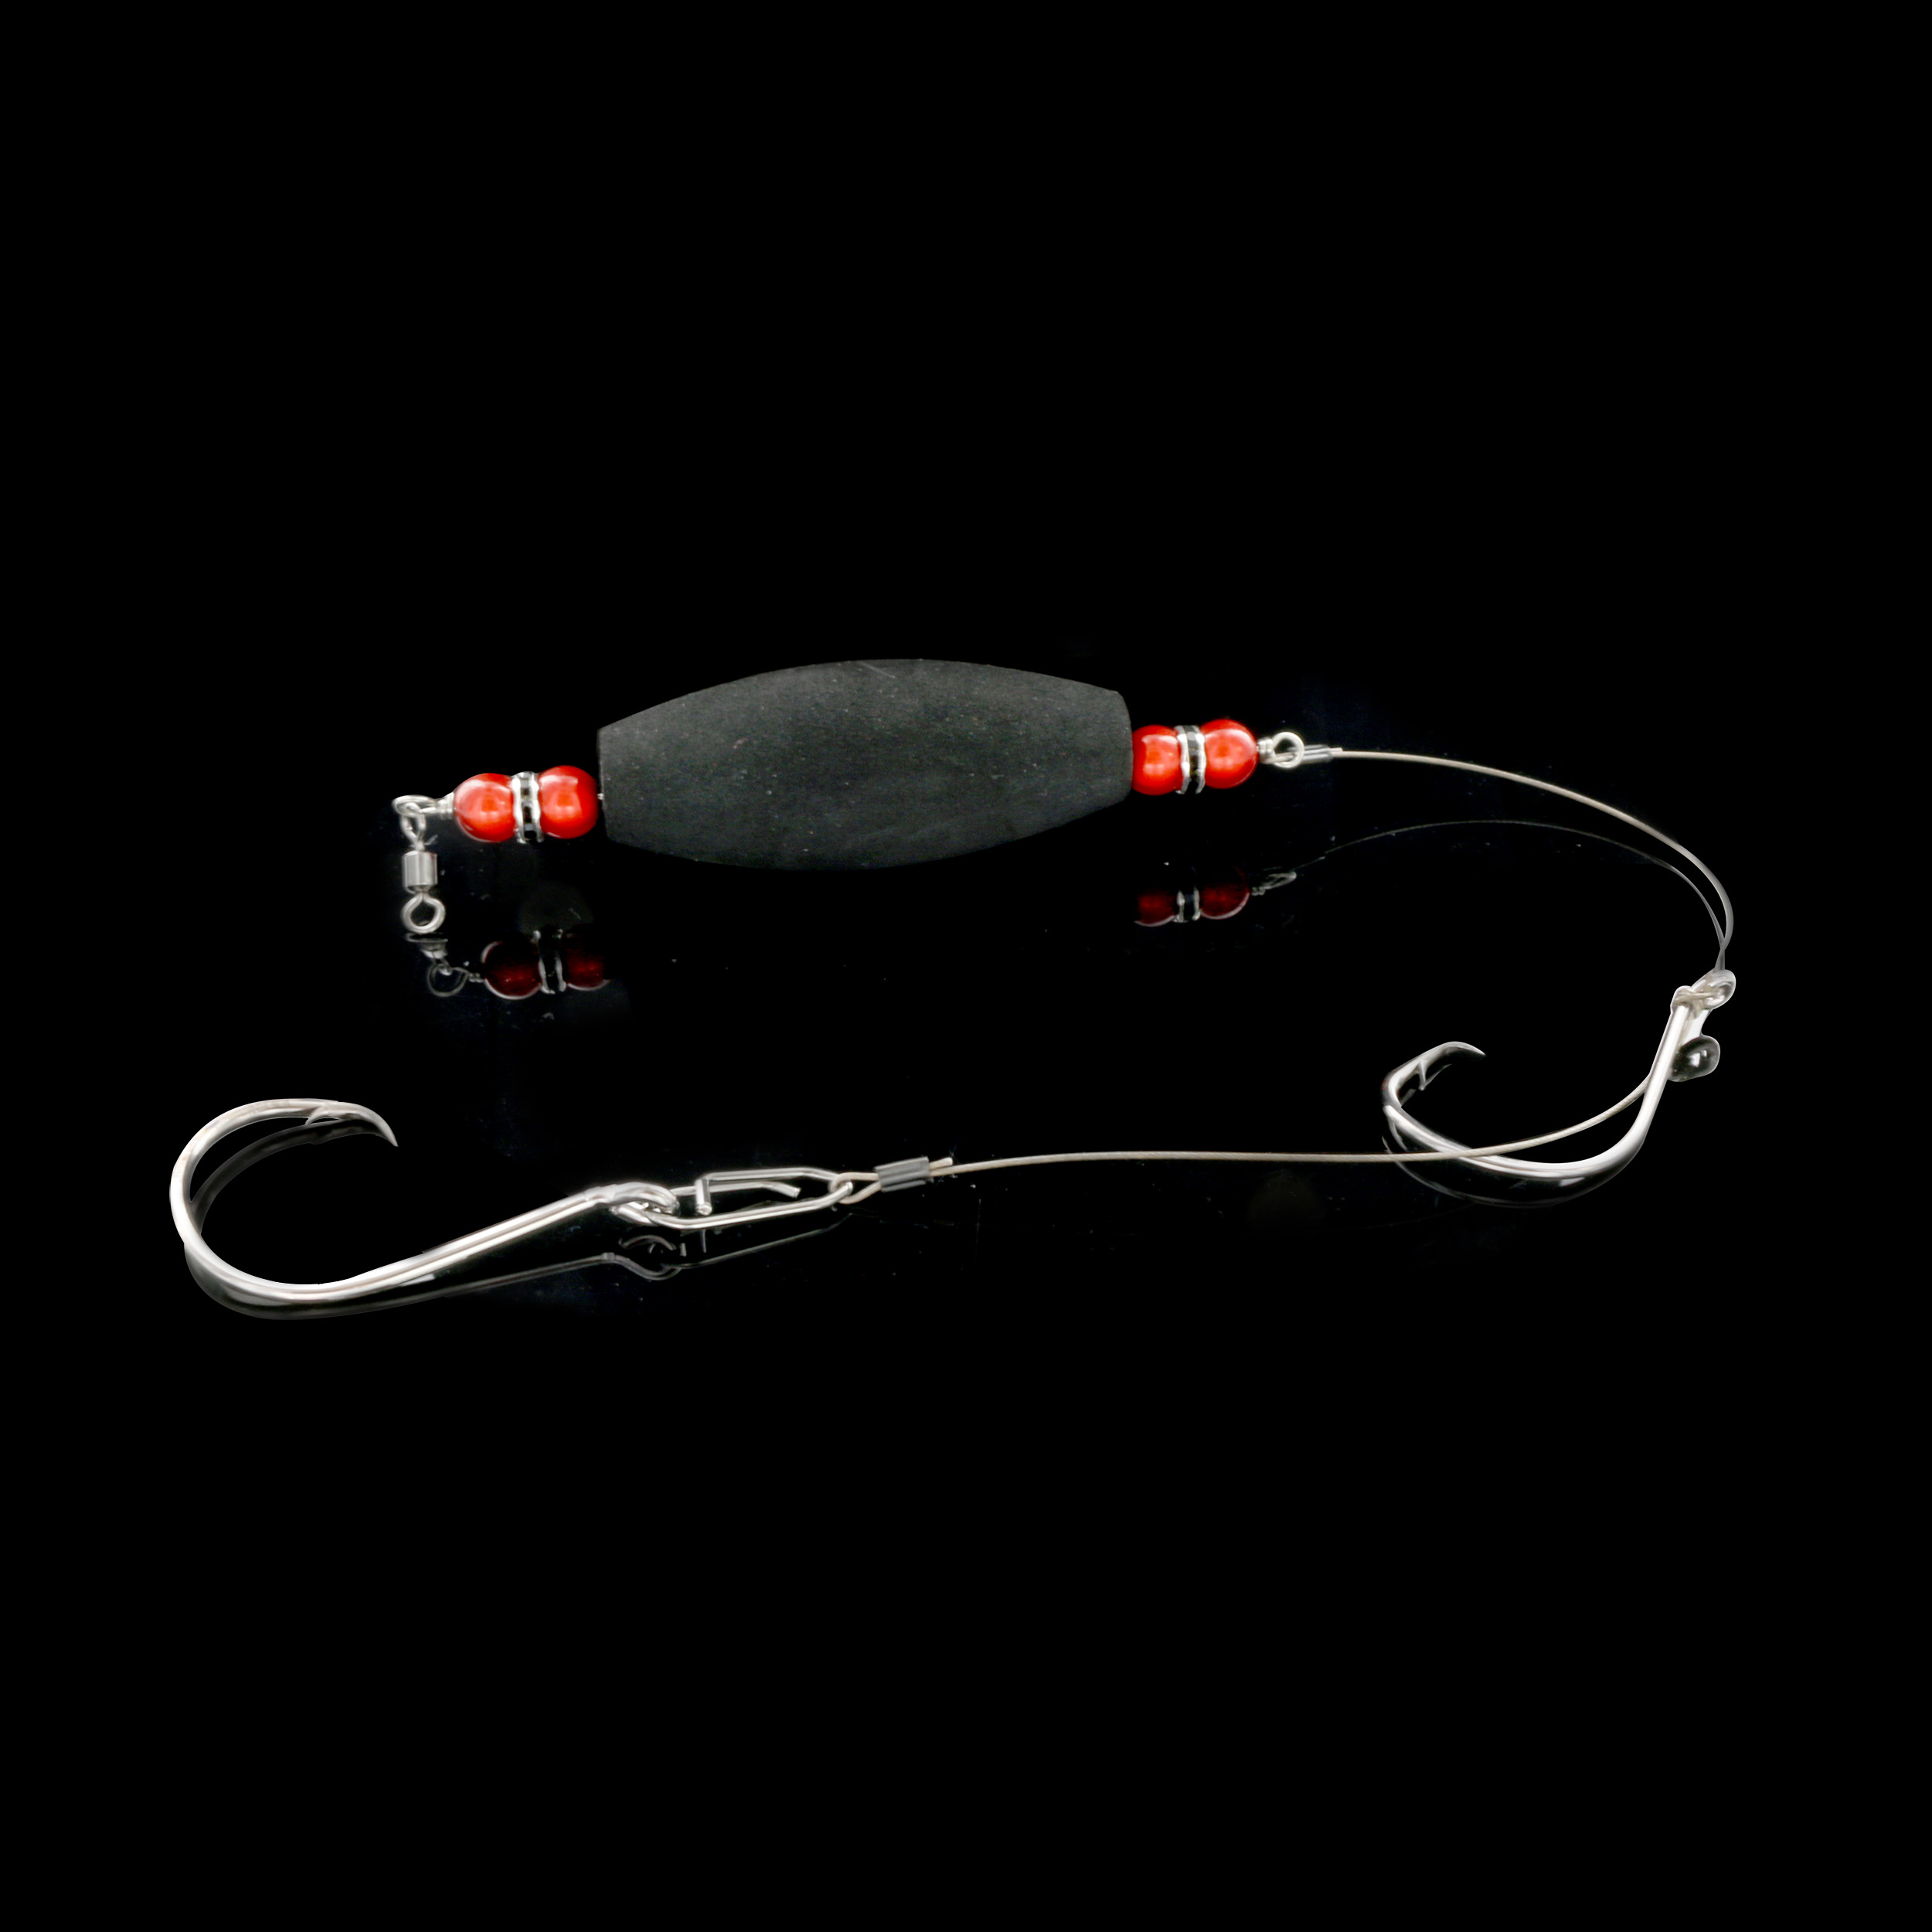 Surecatch 6 Inch Rigged Handcaster with 40lb Mono Fishing Line and Bean  Sinker, Hooked Online